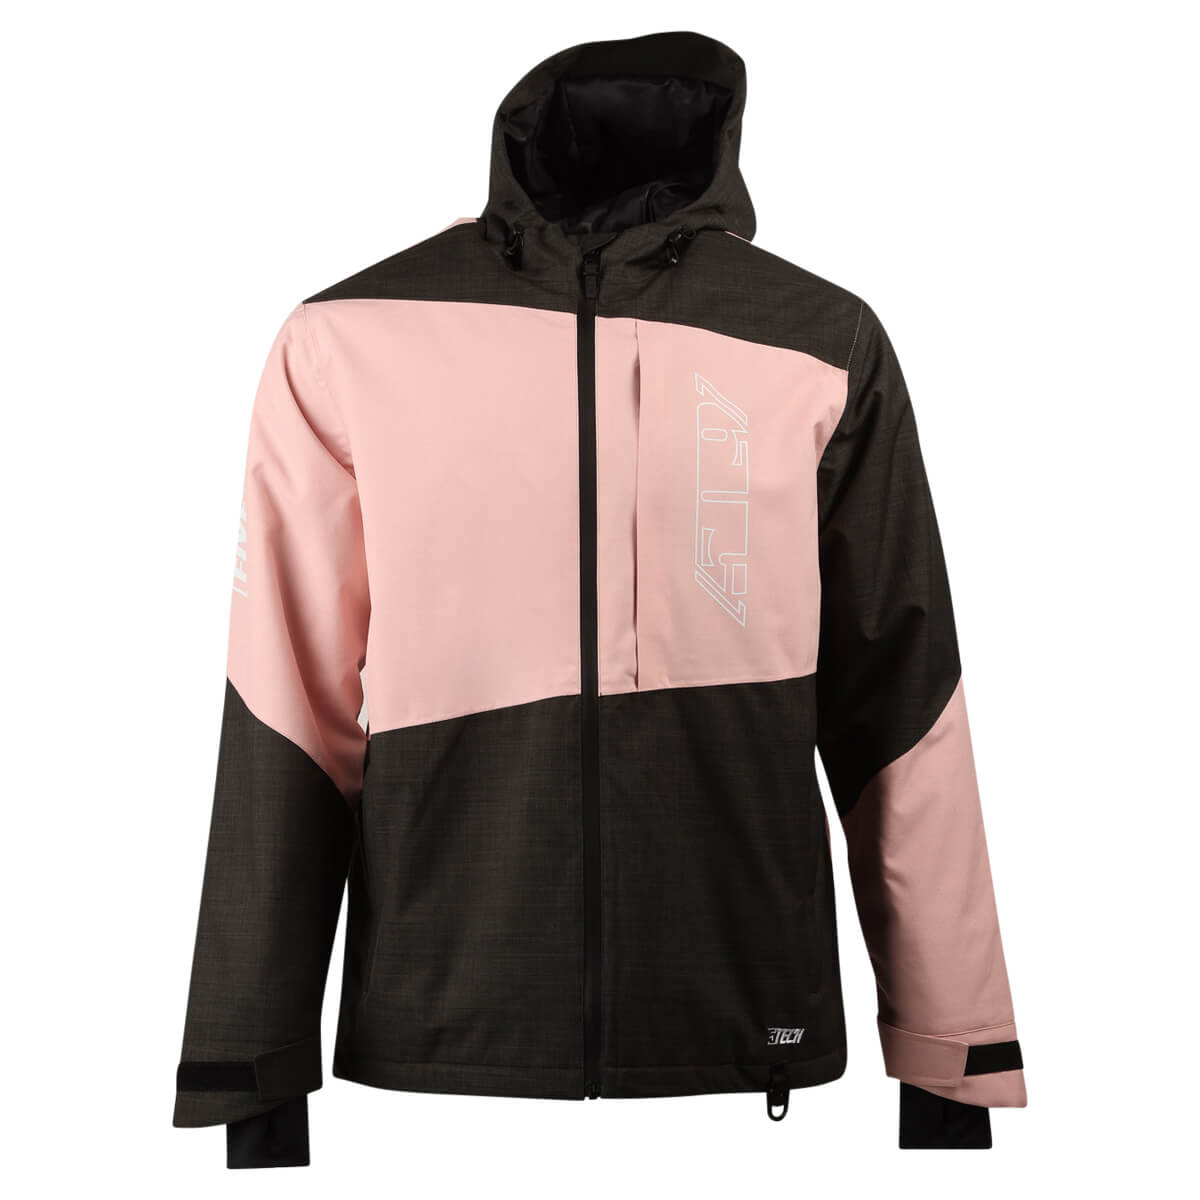 Forge Insulated Jacket